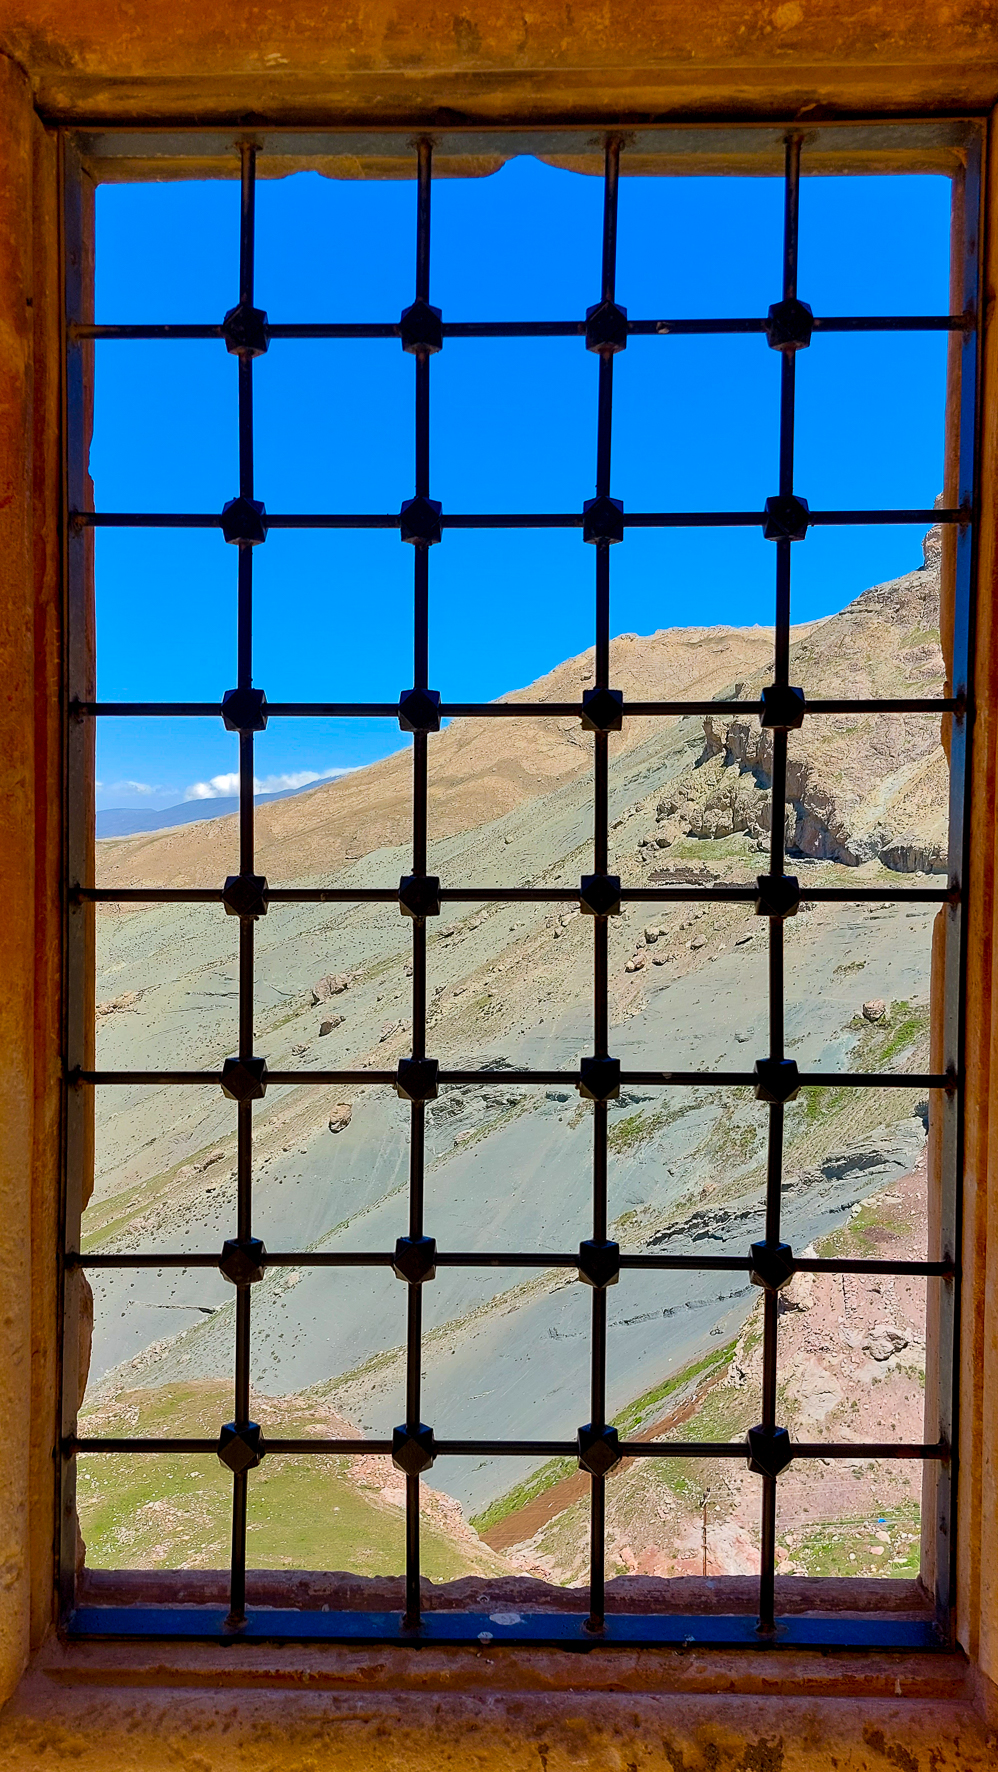 <span  class="uc_style_uc_tiles_grid_image_elementor_uc_items_attribute_title" style="color:#ffffff;">inside the 'Ishak Pasha Palace'</span>